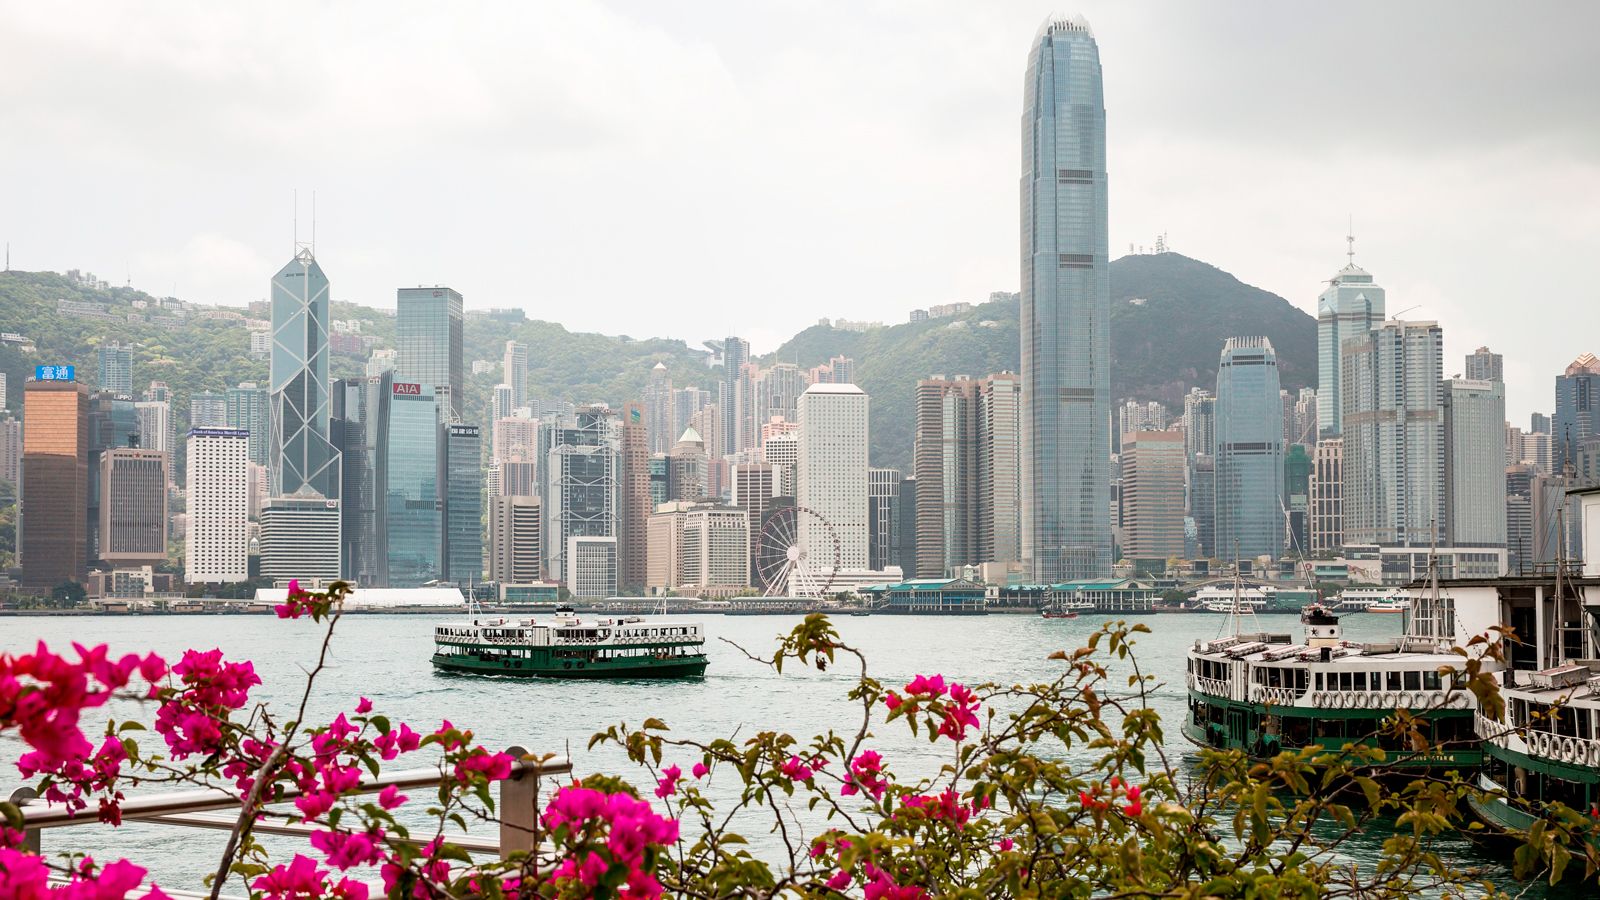 Hong Kong remains world's most expensive city for expats for third straight  year, city becoming 'less attractive' than regional rivals